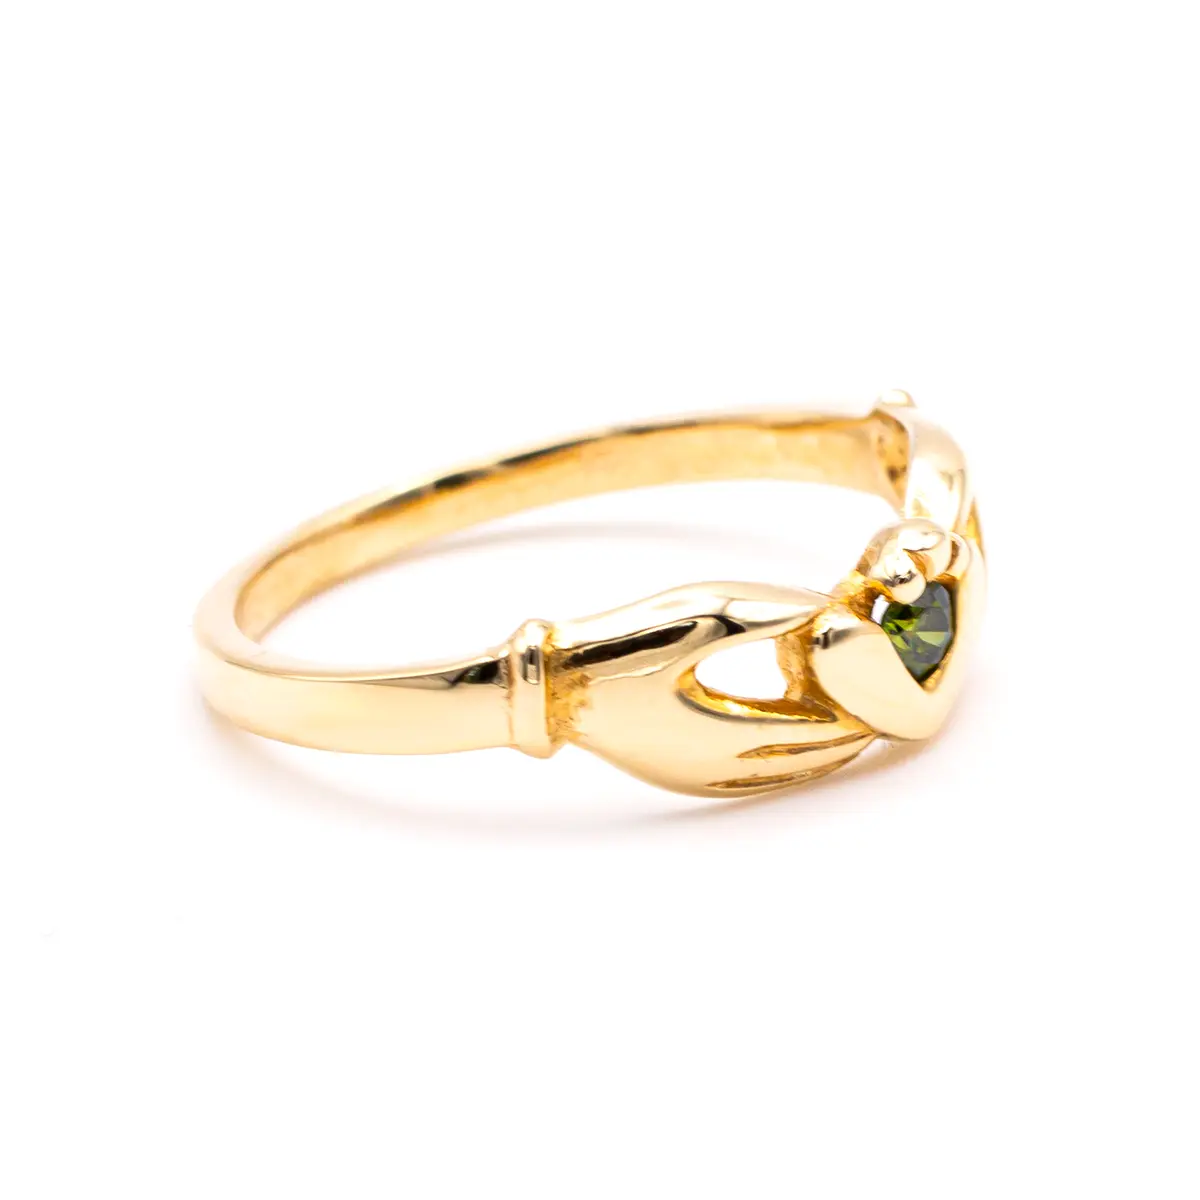 14k Gold Claddagh Ring with Colored Green Diamond